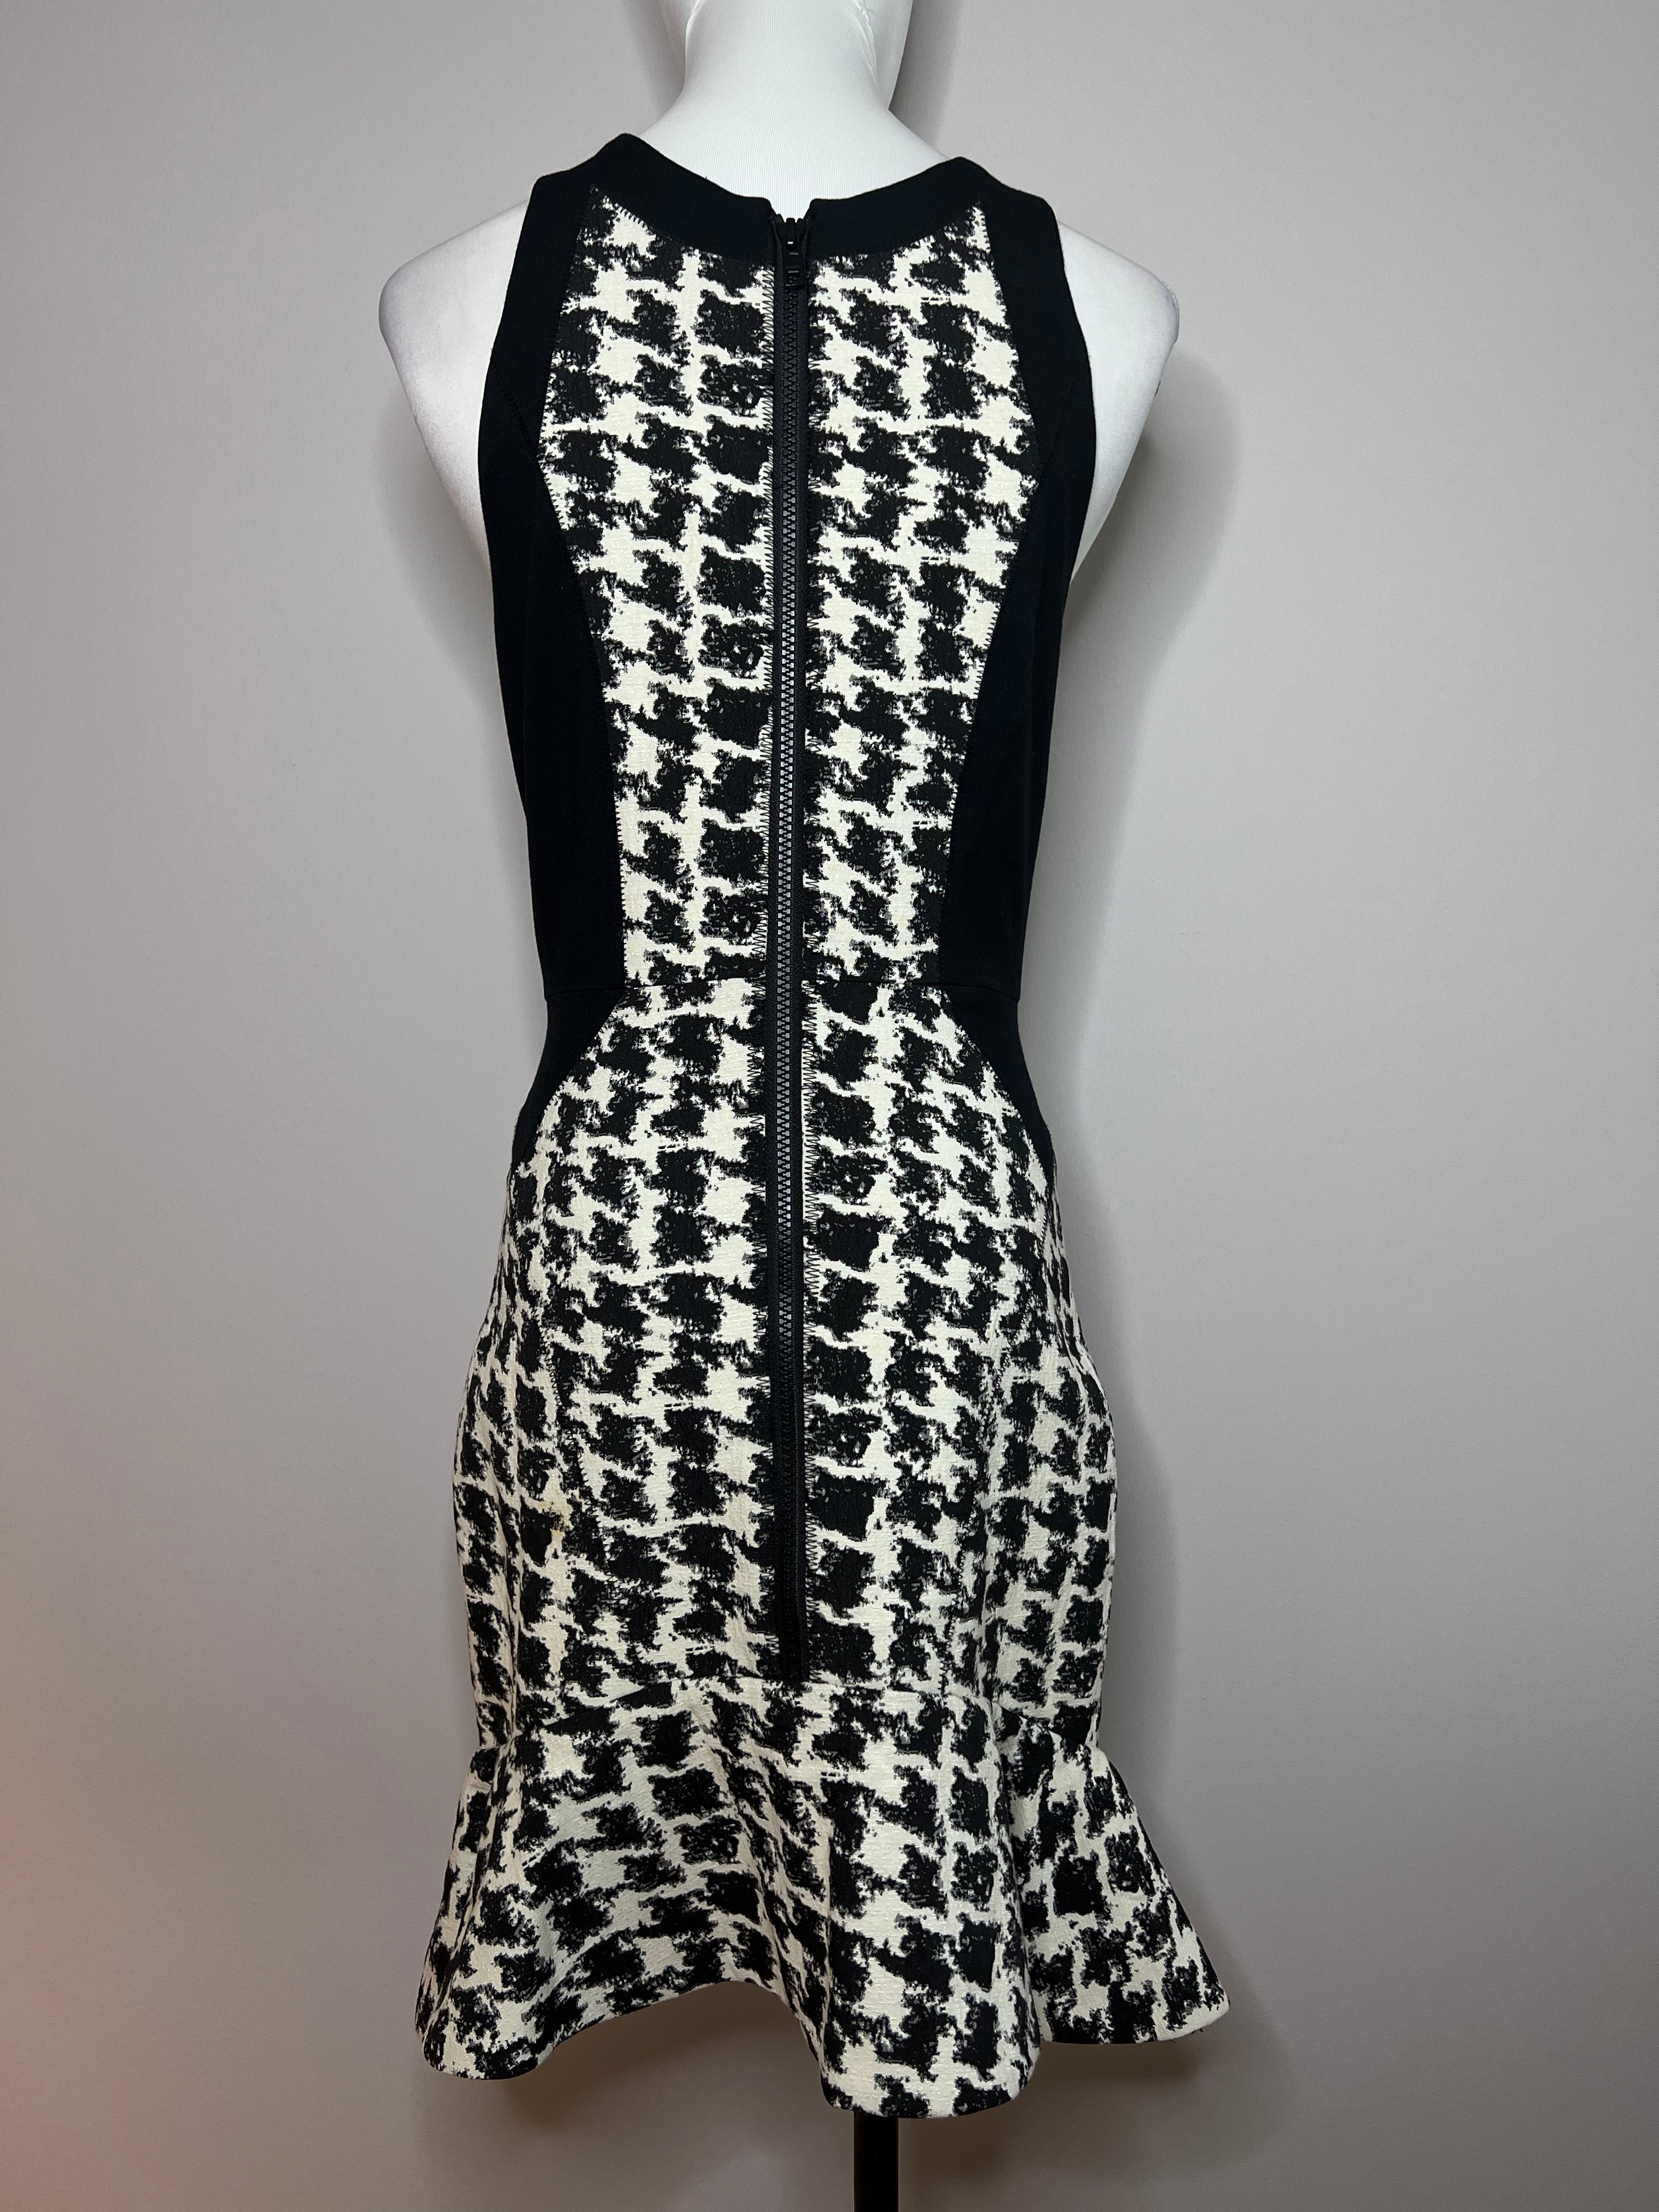 Aline halter top midi dress with a rough houndstooth pattern in the center and zipper going down the middle. - PARKER